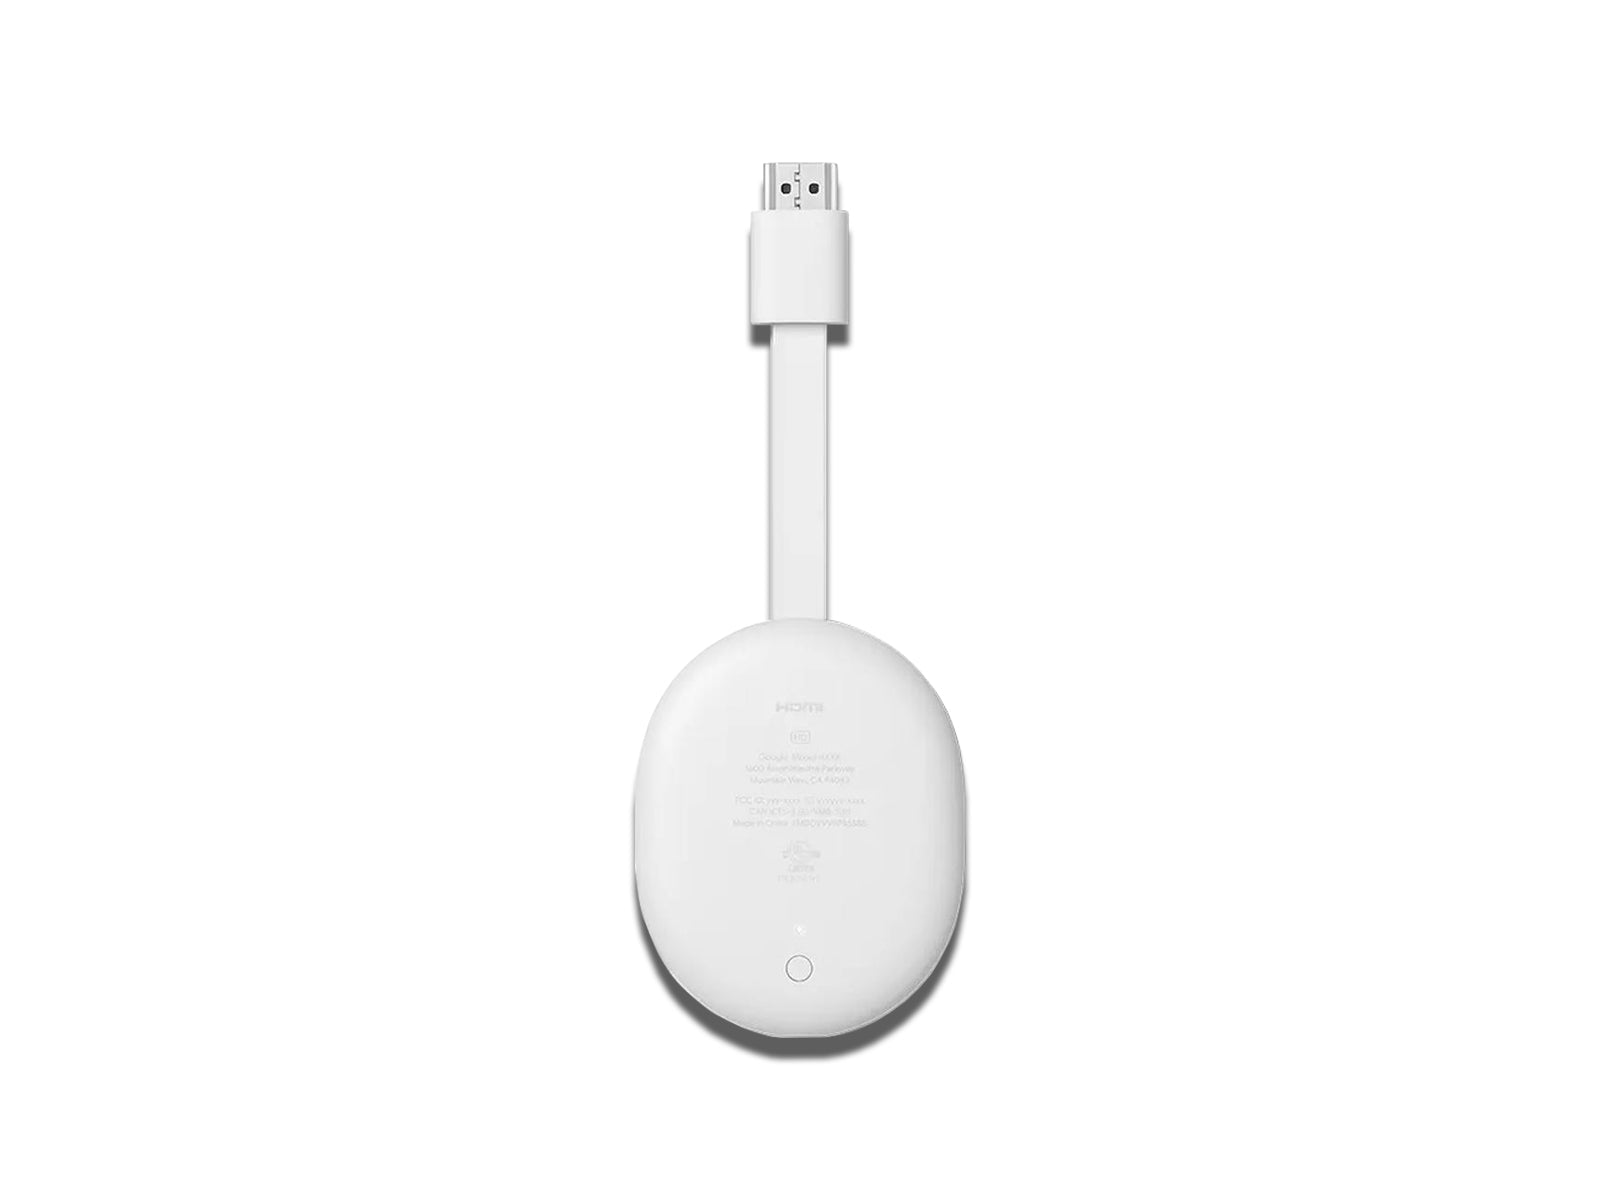 Back View of The Chromecast on The White Background